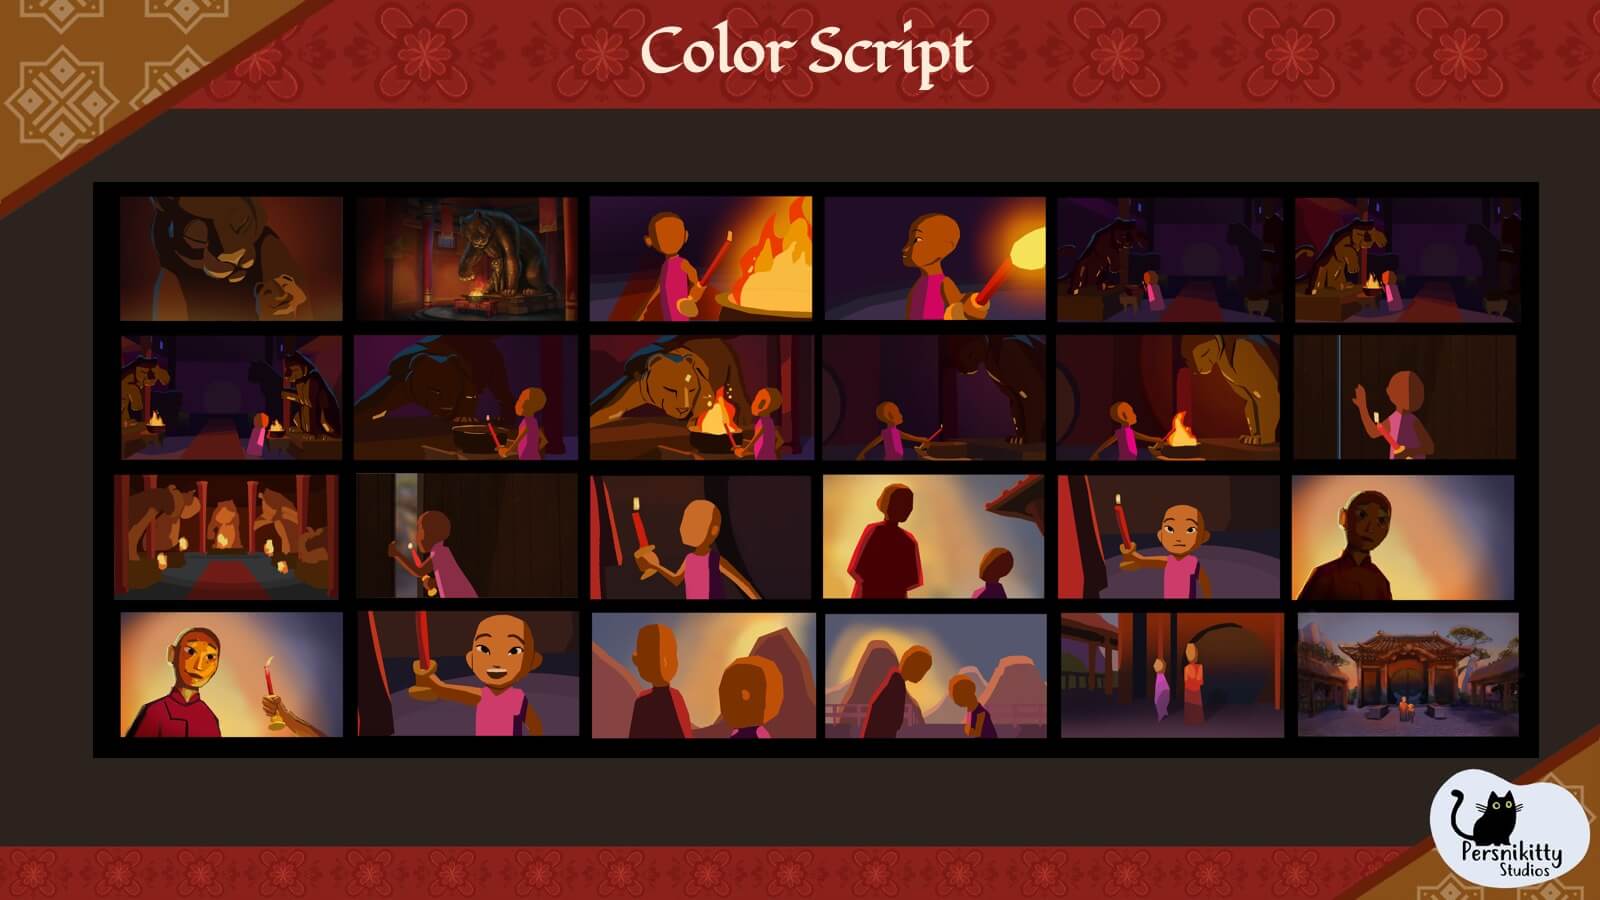 A slide featuring the color script for the film.